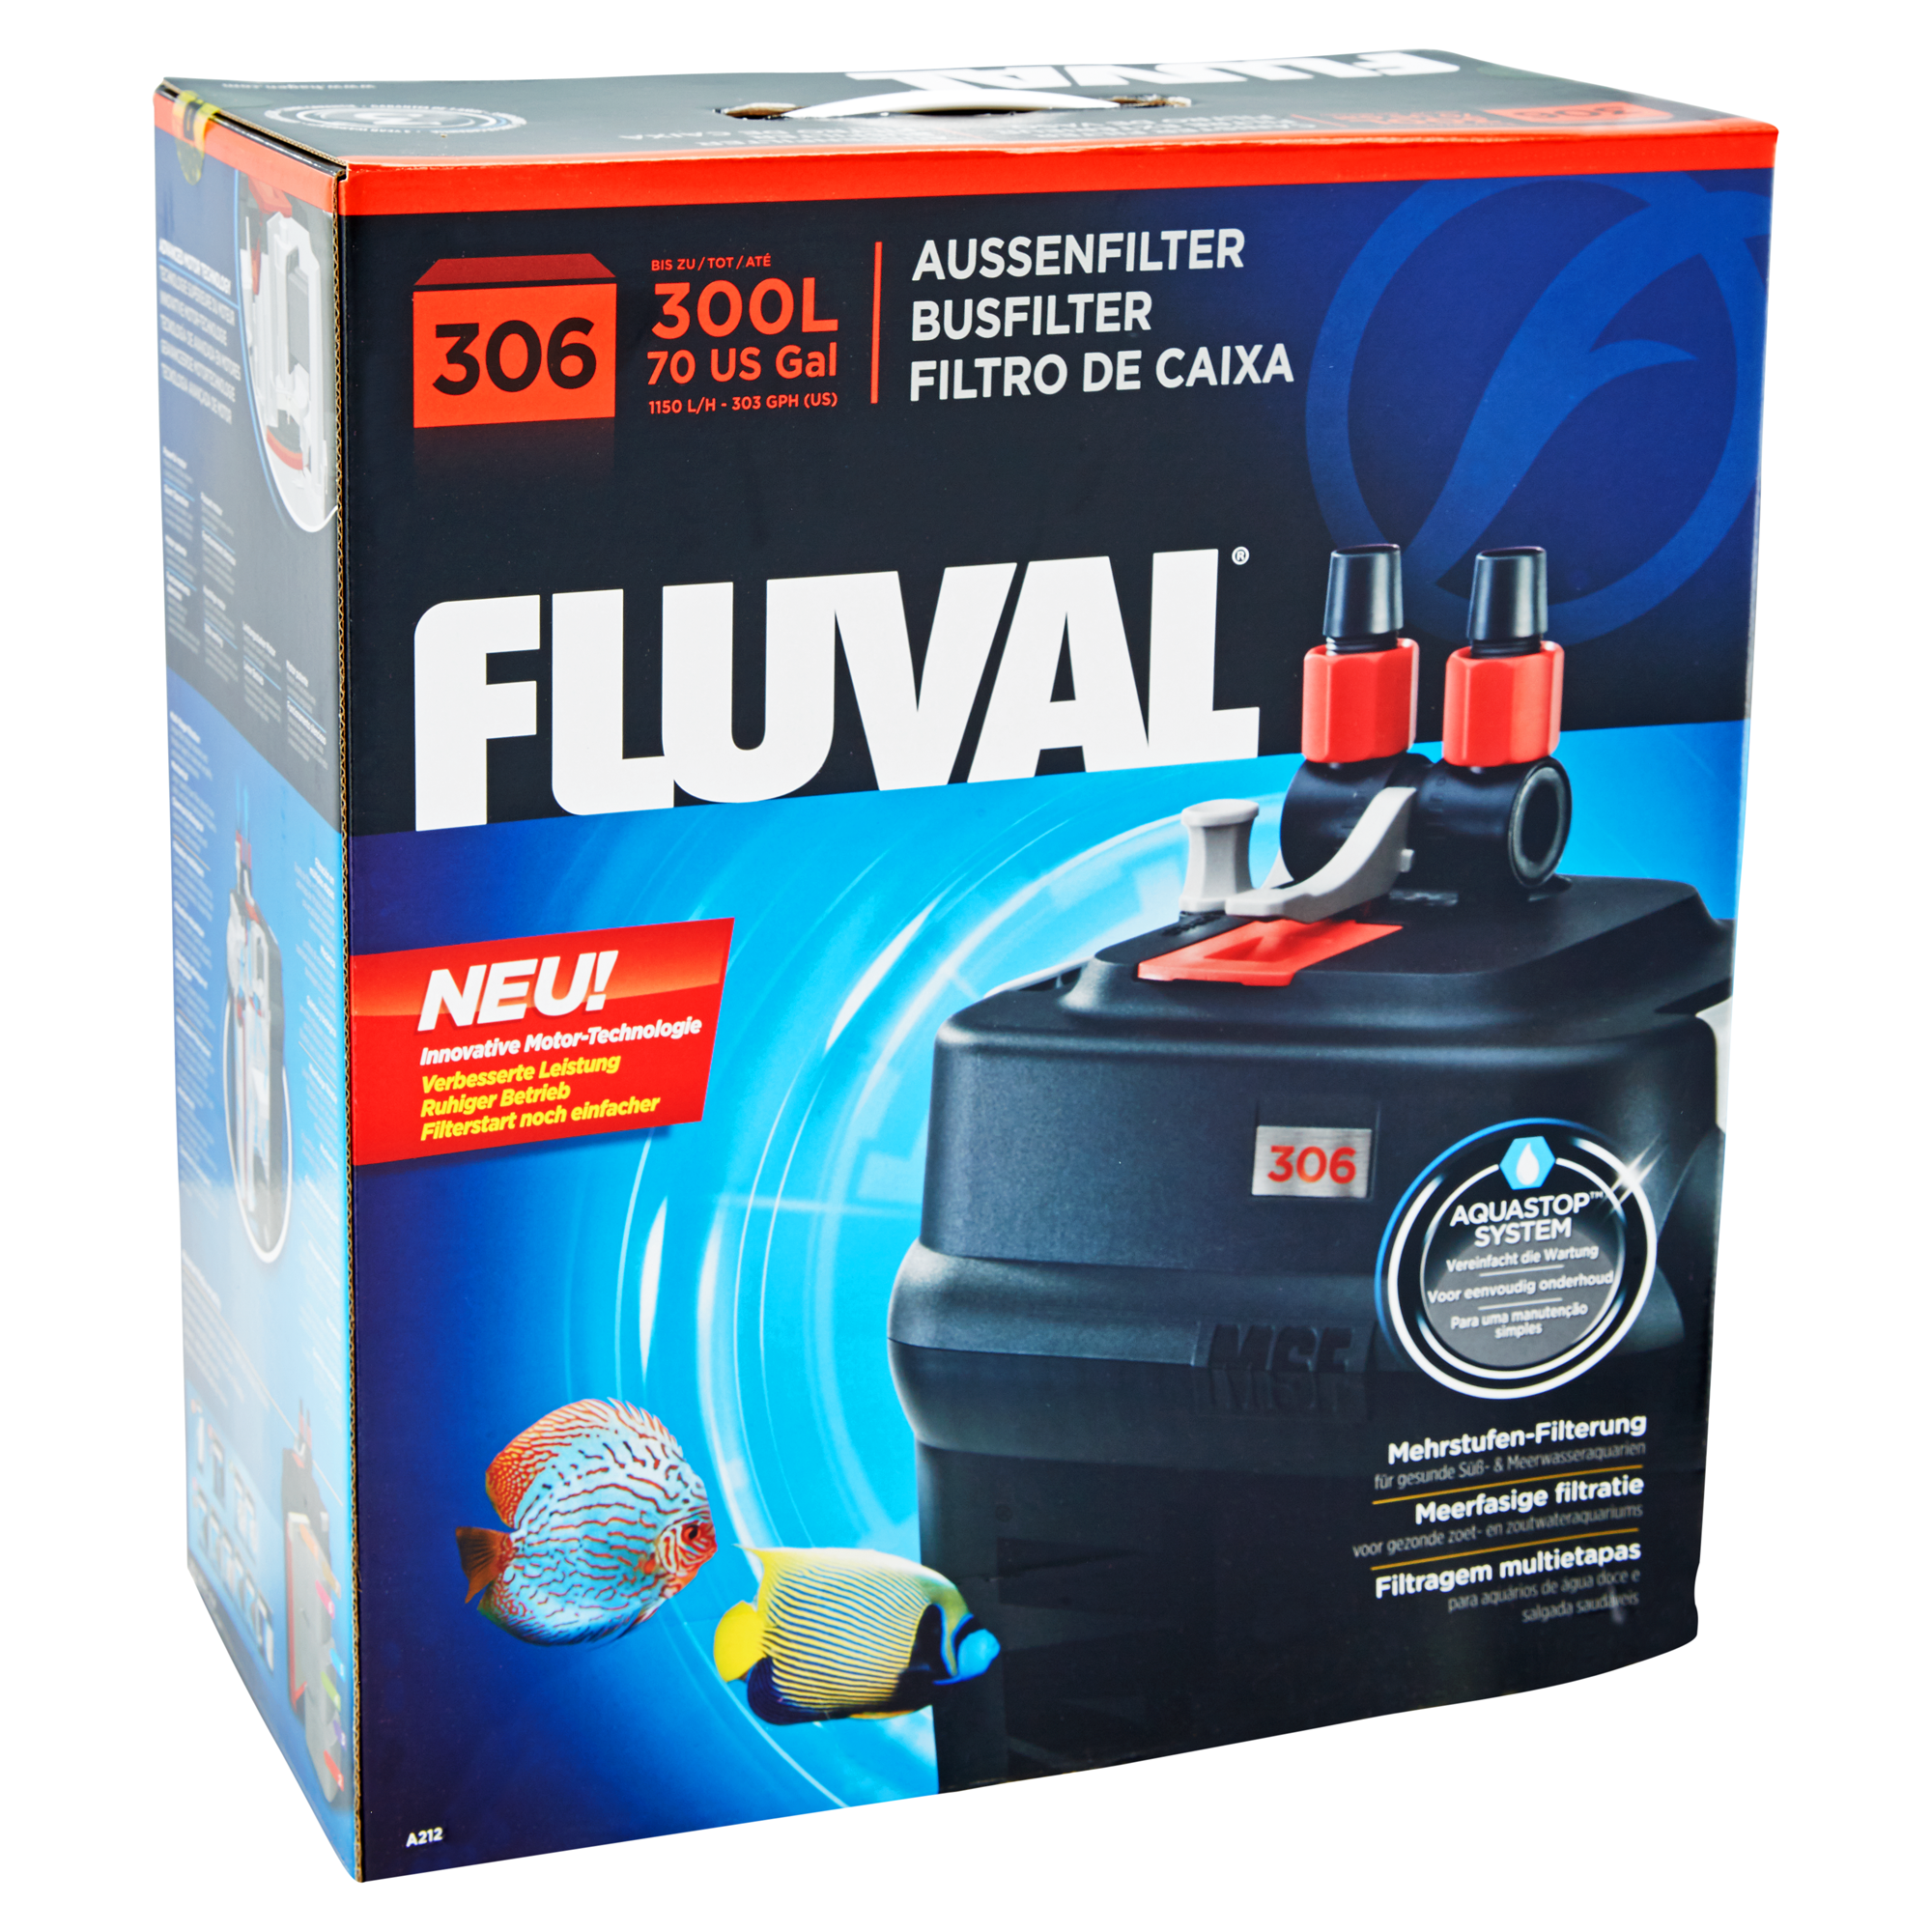 Außenfilter 'Fluval' 306 + product picture